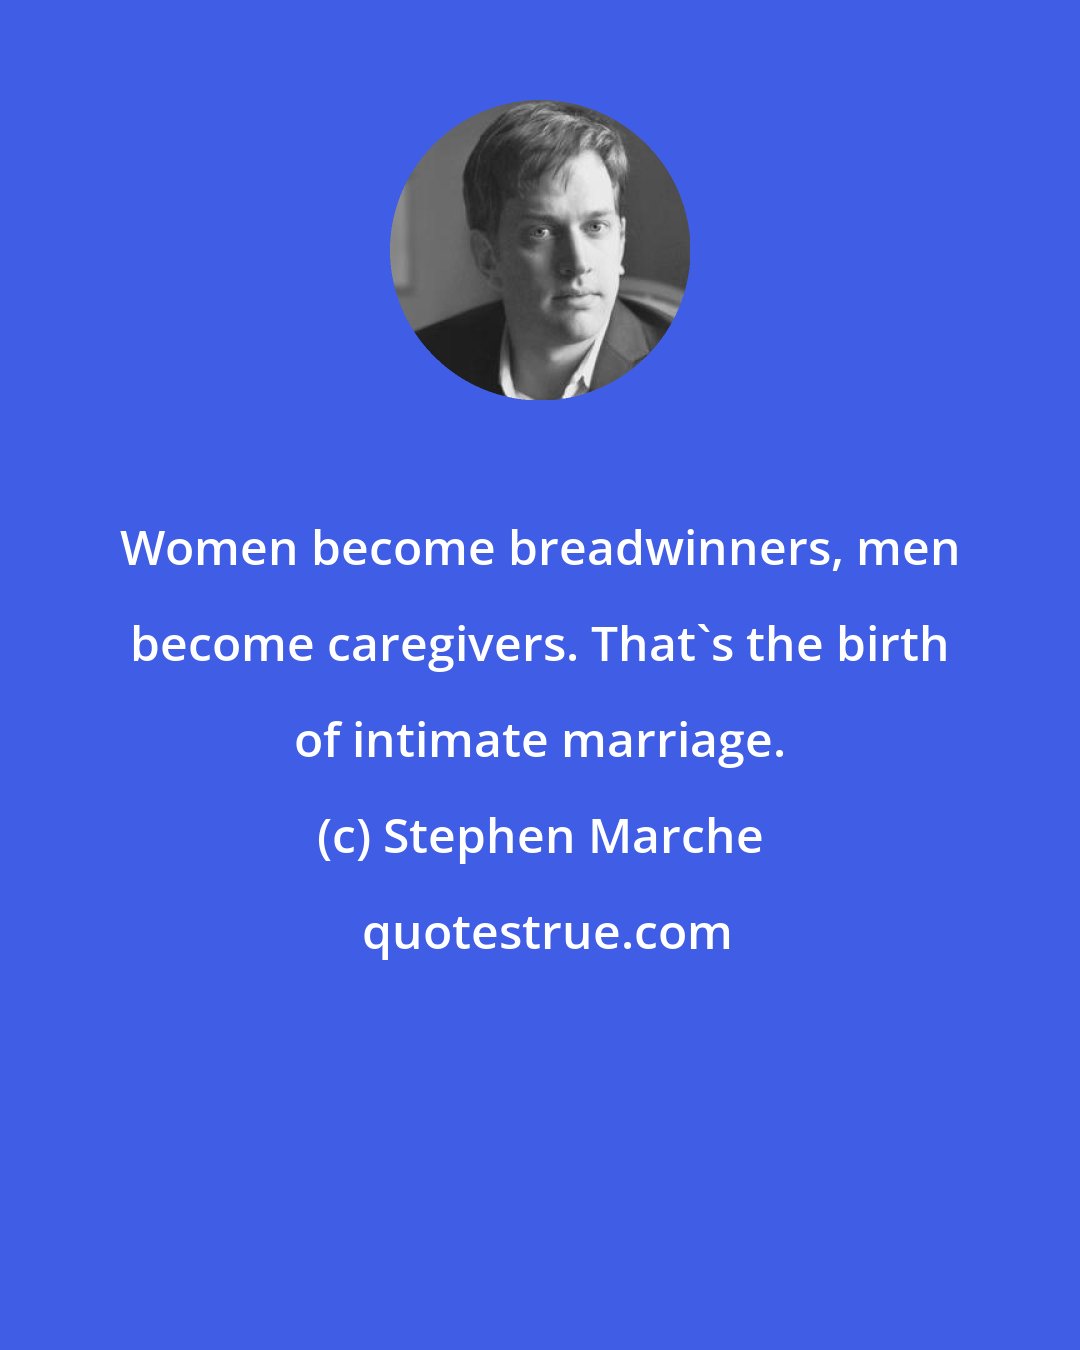 Stephen Marche: Women become breadwinners, men become caregivers. That's the birth of intimate marriage.